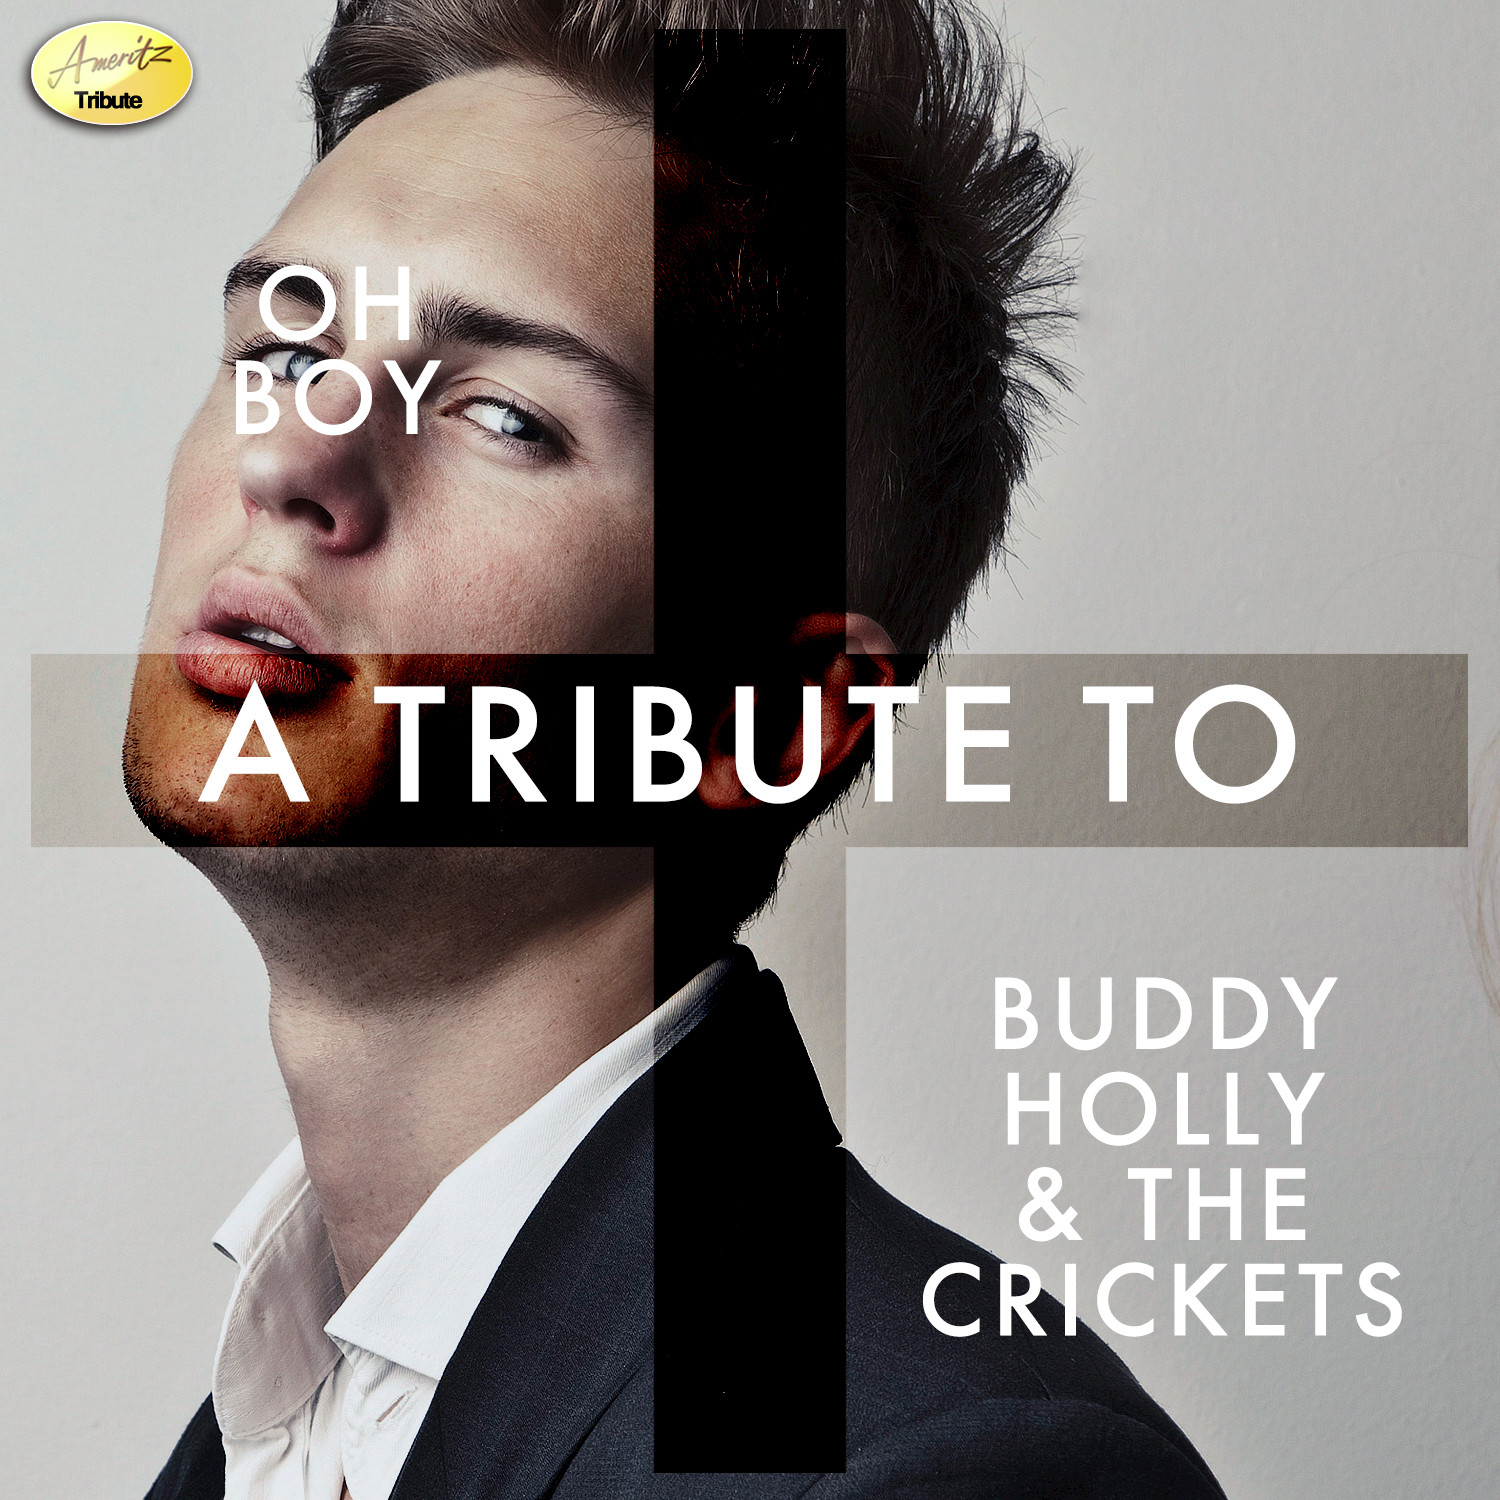 Oh Boy - A Tribute to Buddy Holly & the Crickets